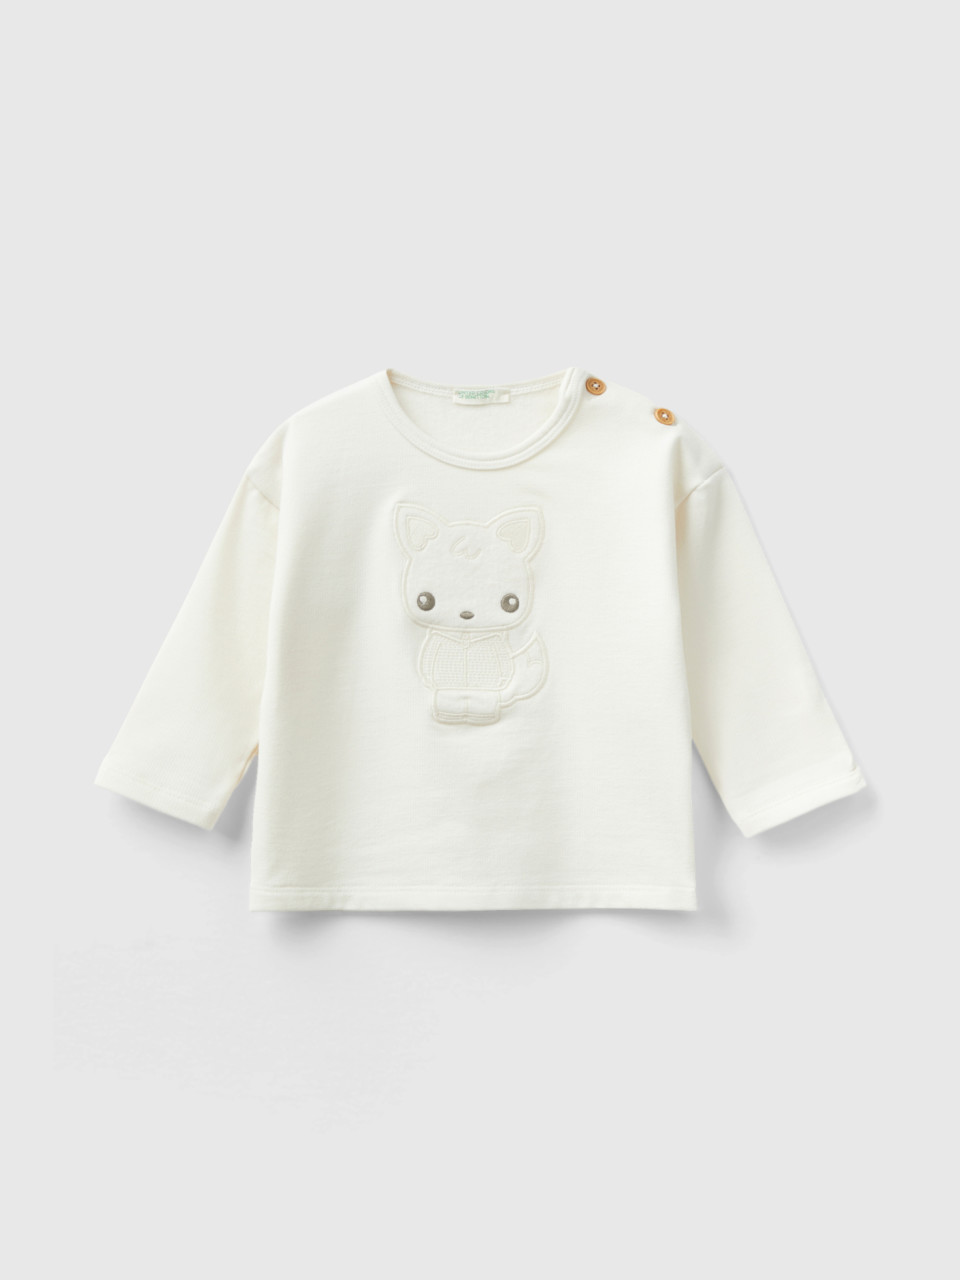 Benetton, Warm T-shirt With Patch, Creamy White, Kids